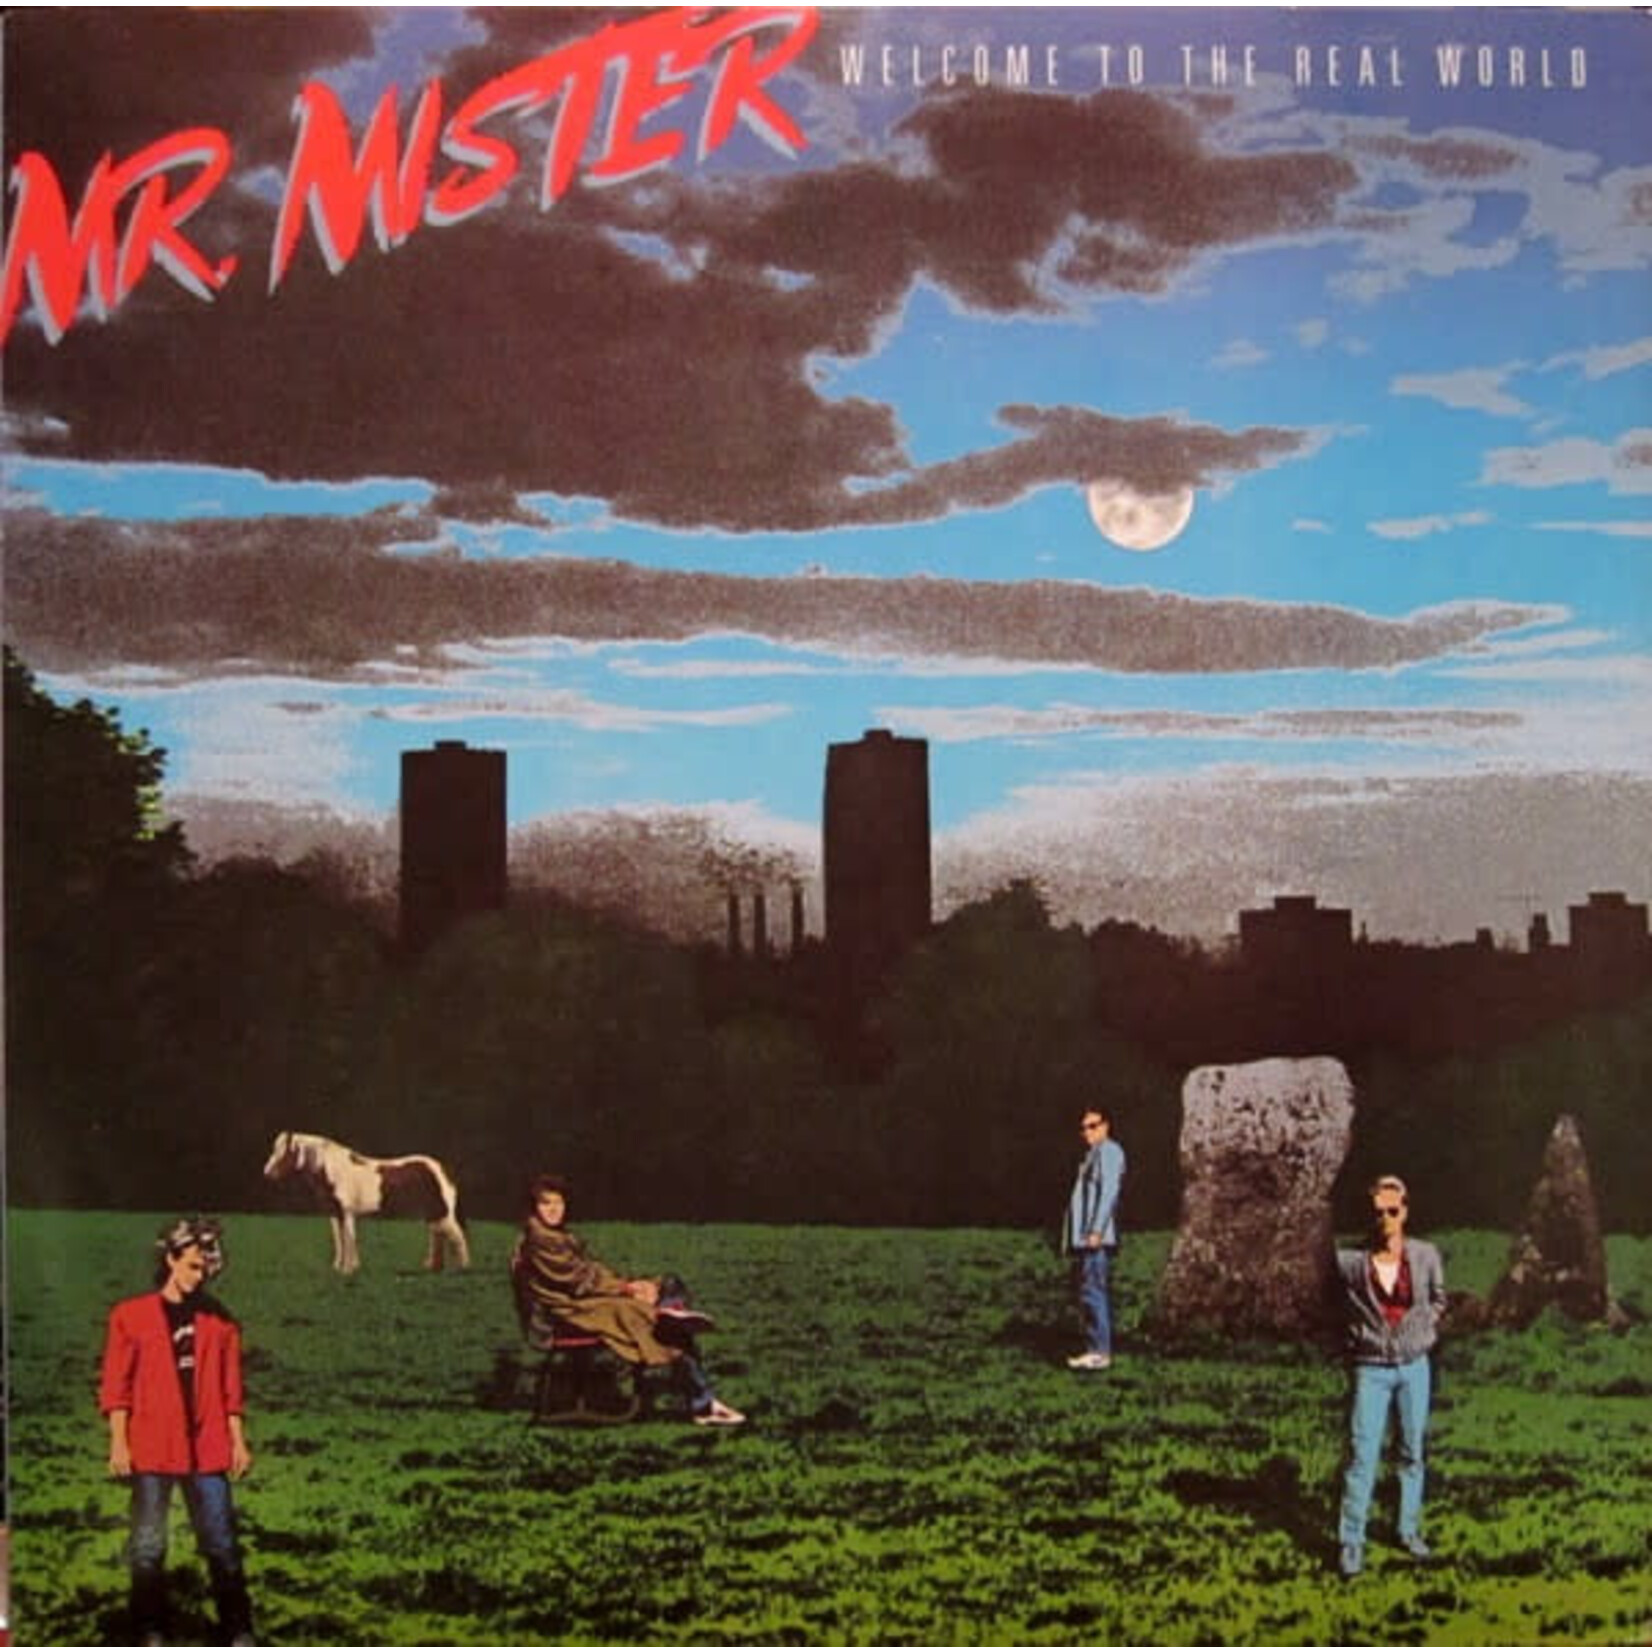 Mr. Mister – Welcome To The Real World (VG, 1985, LP, Reissue, RCA Victor – AFL 1-7180, Canada)